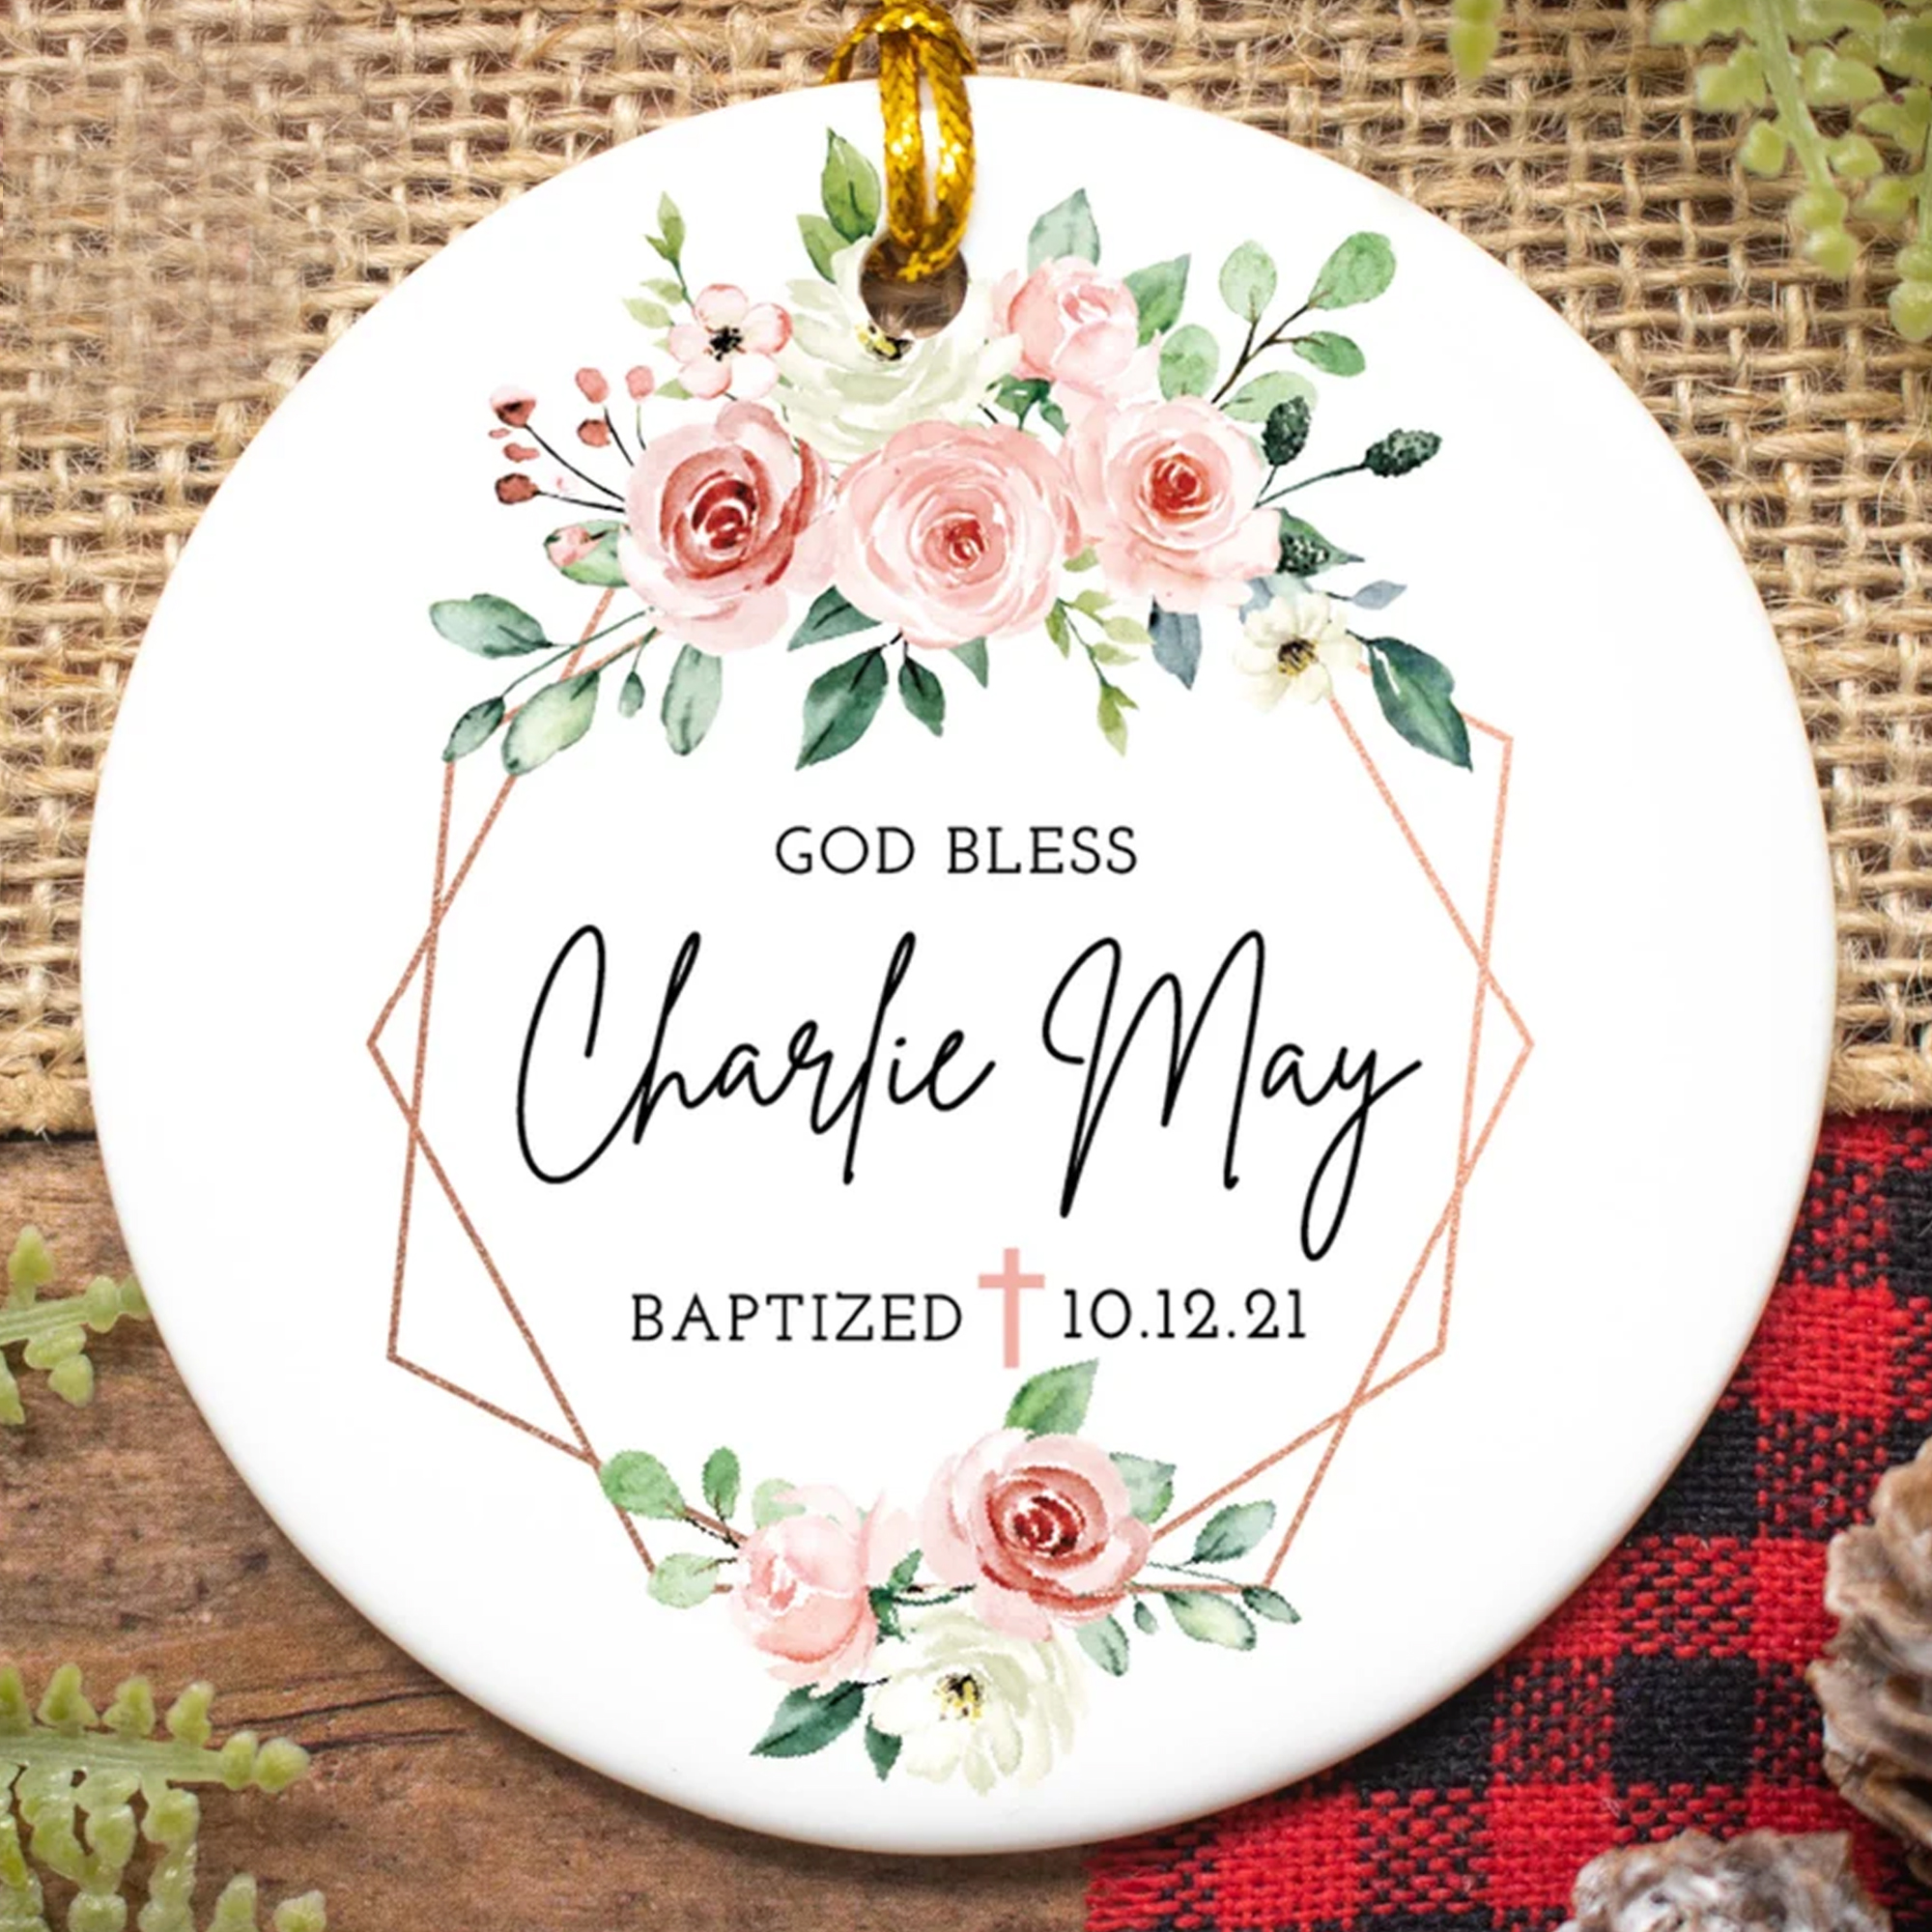 Personalized God Bless Baptism Christmas Ornament For Girl Baptized Ornament Keepsake For Girl Christening Gift For Girl From Godmother